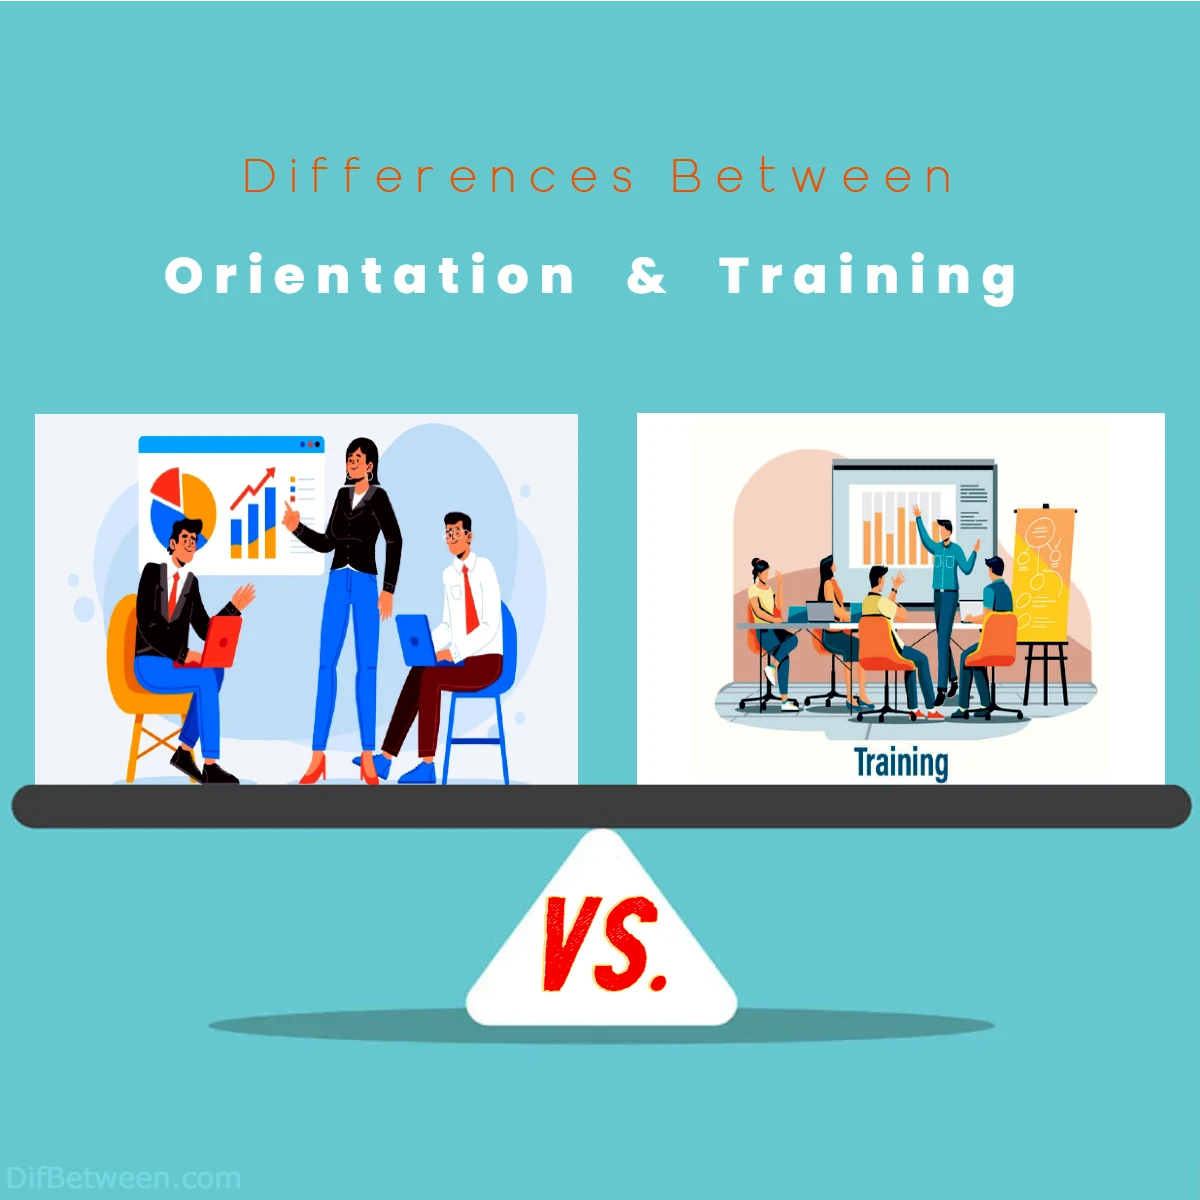 Differences Between Orientation vs Training